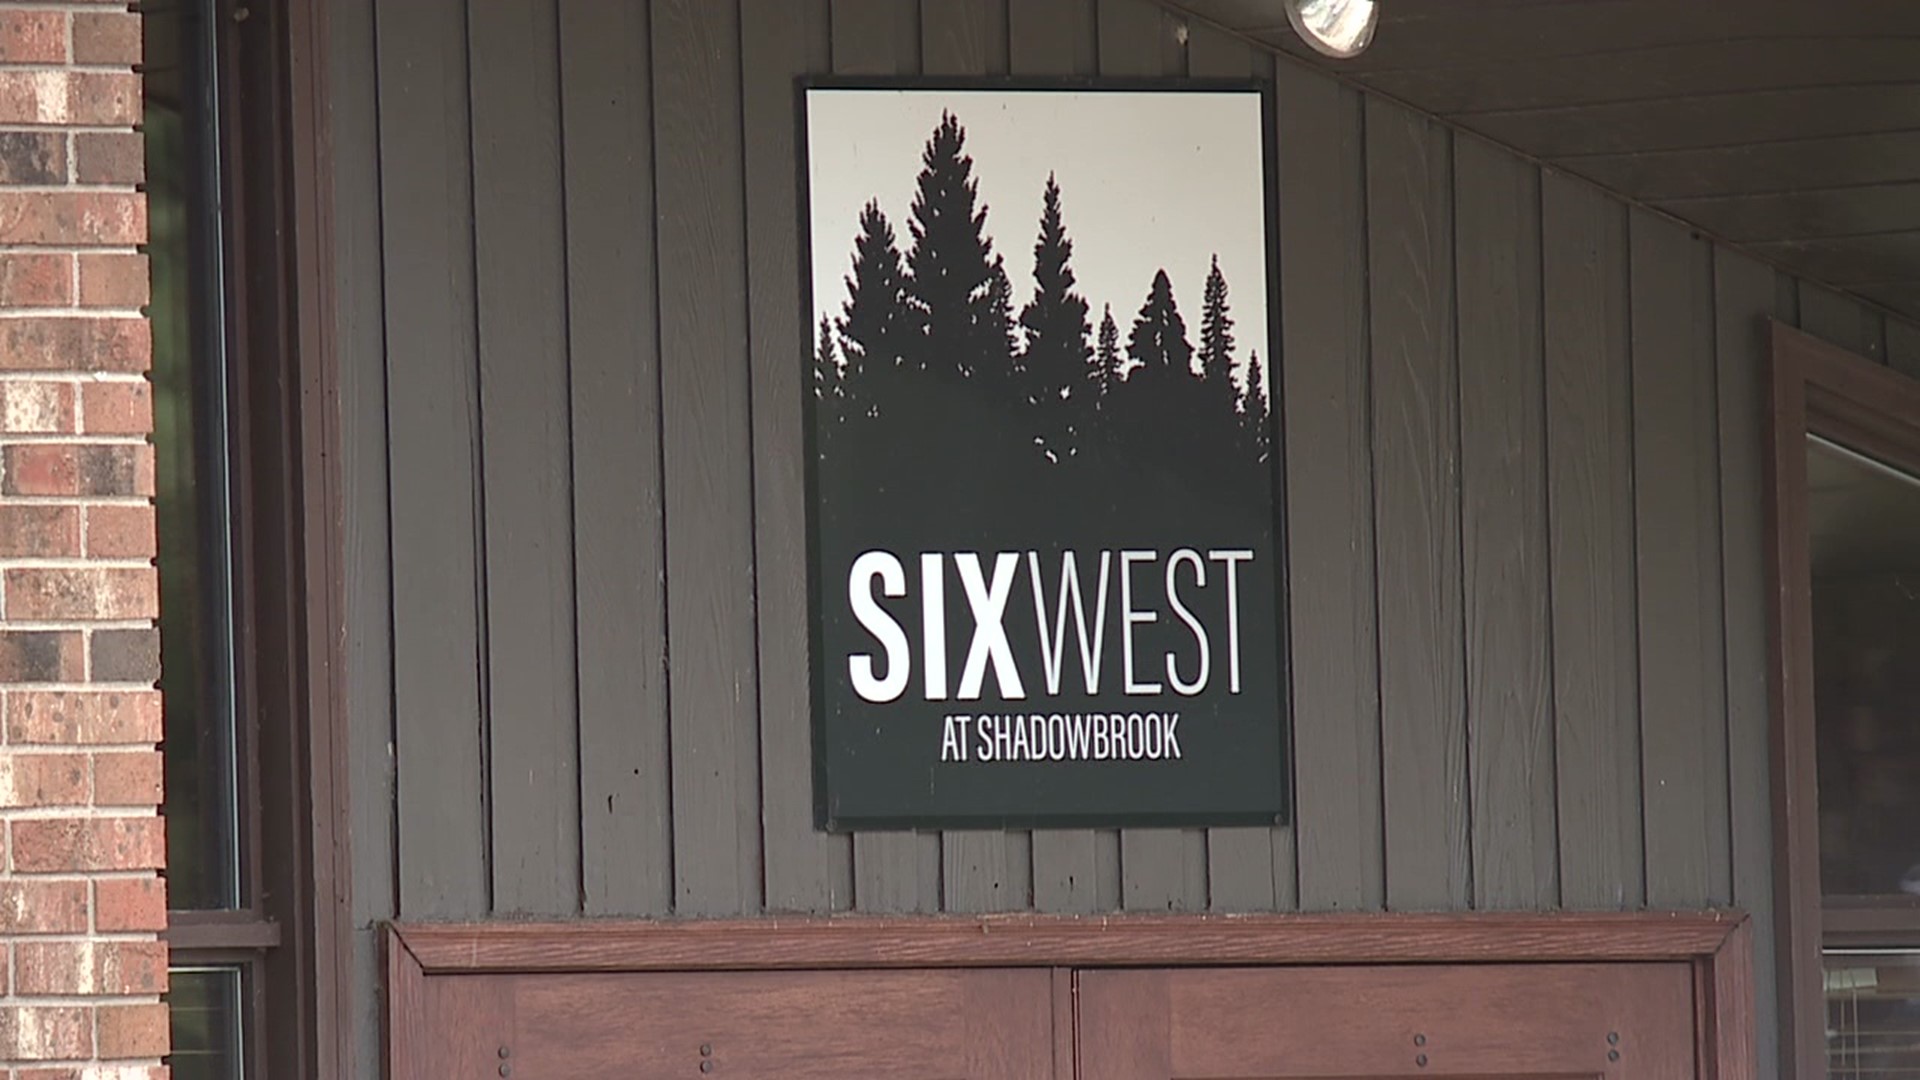 Six West is the new name of the eatery at Shadowbrook Resort just outside Tunkhannock.